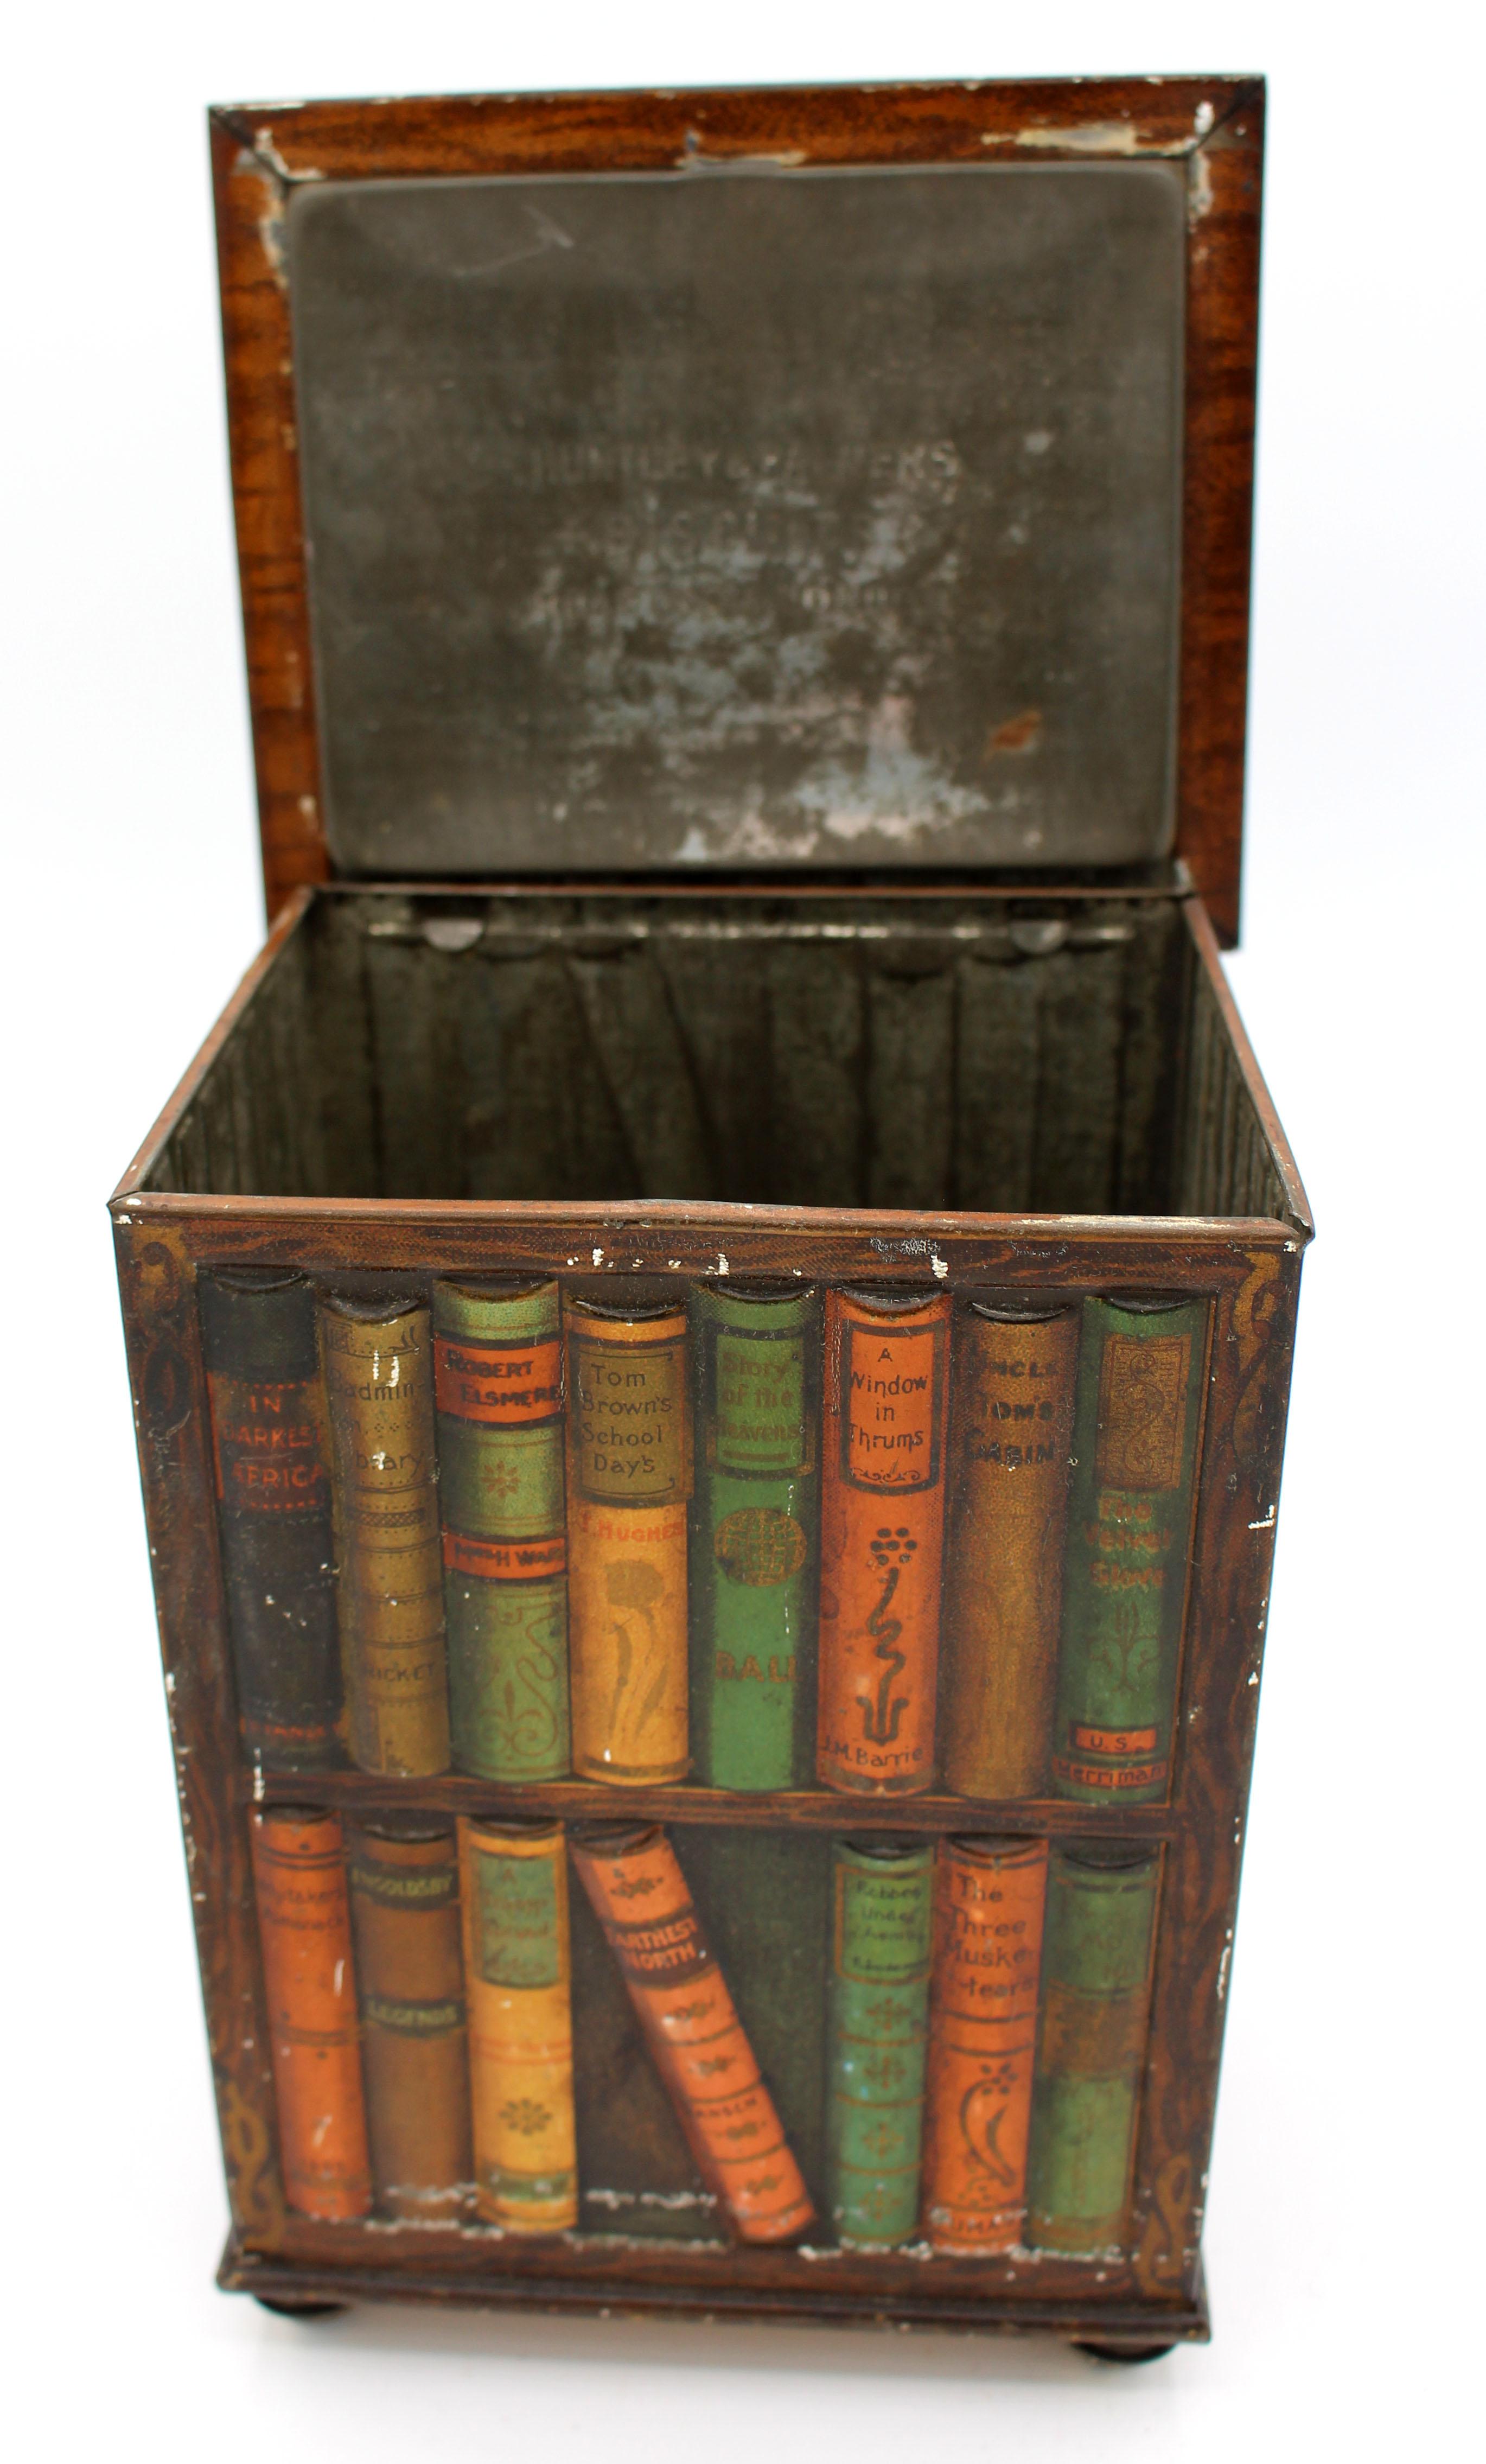 Faux revolving bookcase biscuit tin box by Huntley & Palmers, 1905, English. In the form of a revolving bookcase filled with classic novels, notice the detail - end covers show on sides. Overall good condition given age & use, tiny edge